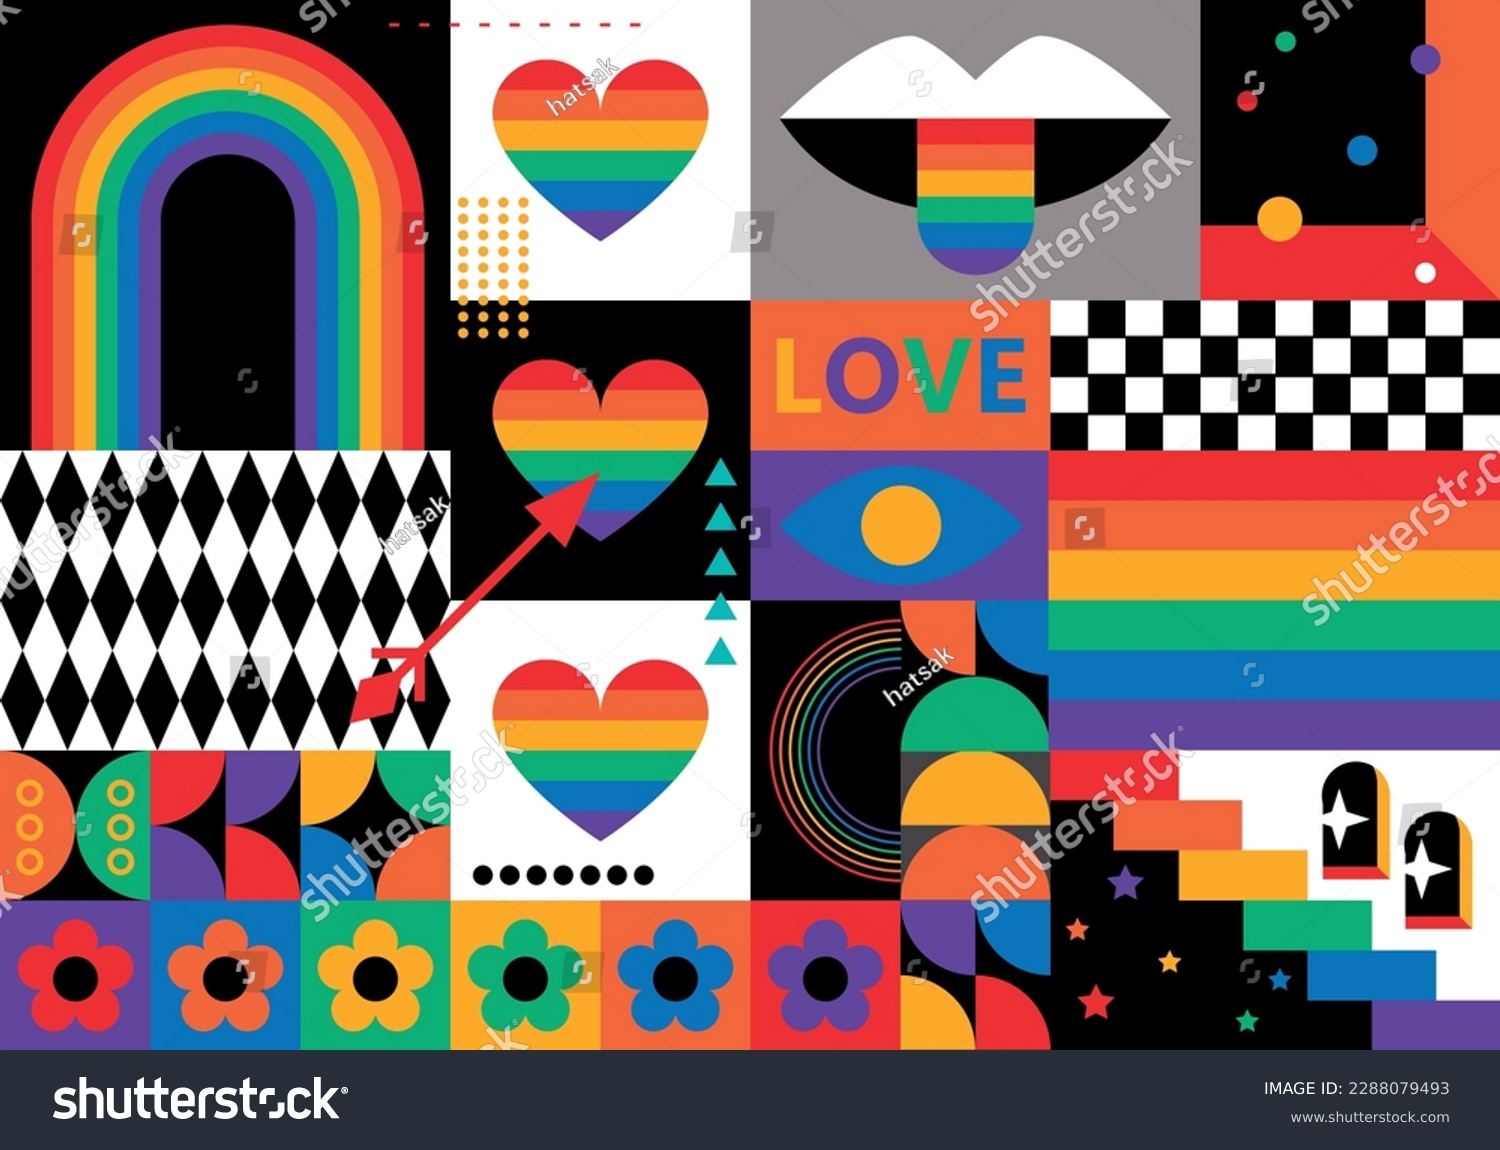 Rainbow background with hearts. LGBT+ Pride design. Rainbow community pride month. Love, freedom, support, peace. Poster with LGBT rainbow flag, heart and love. Colorful social media post template #2288079493